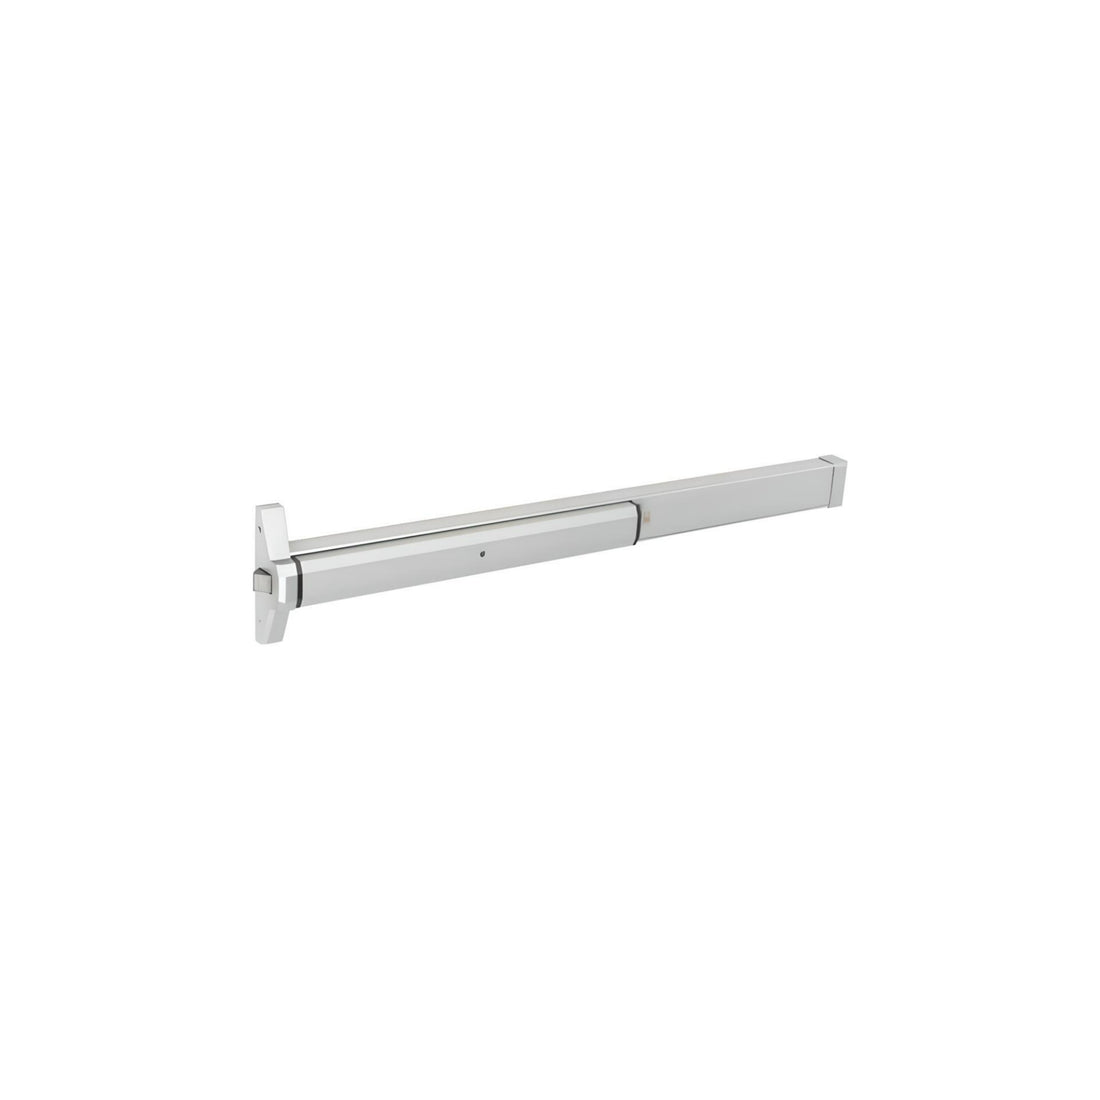 STED Series Grade 2 Storefront 48 in Concealed Vertical Rod Narrow Stile Panic Exit Device w/ Mortise Cylinder